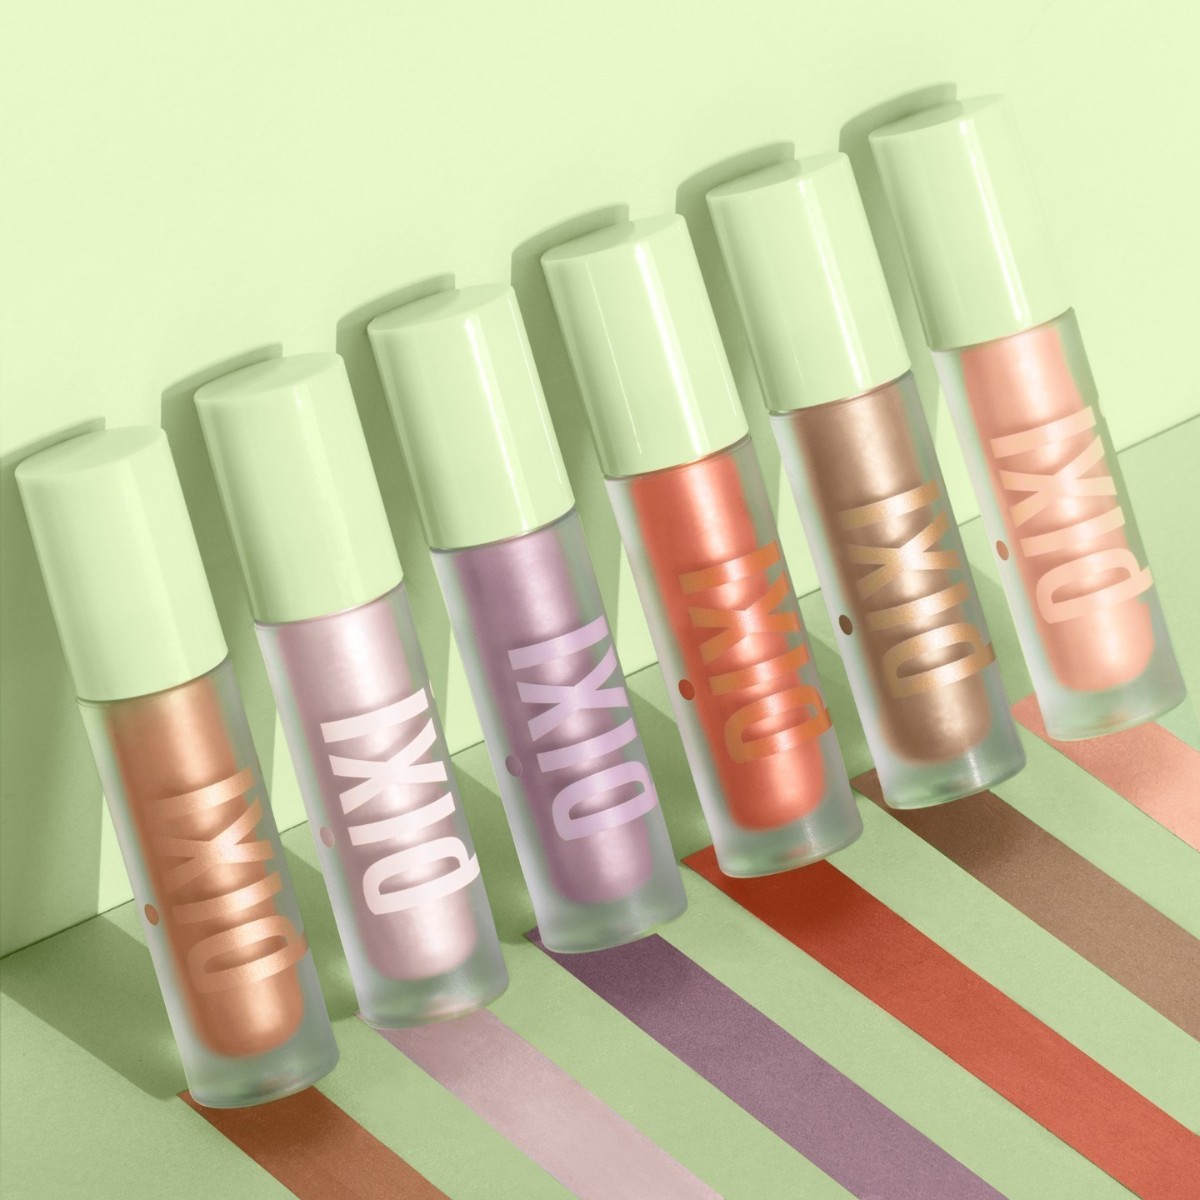 Light up your eyes with the luminous hues of our EyeLift Max Liquid Eyeshadow in shade Olive! ✨ Infused with Avocado, Rosehip and Mango Seed Oil, this liquid radiance pigment will nourish, soothe and hydrate your lids with every blink! ✨

#PixiBeauty #Makeup